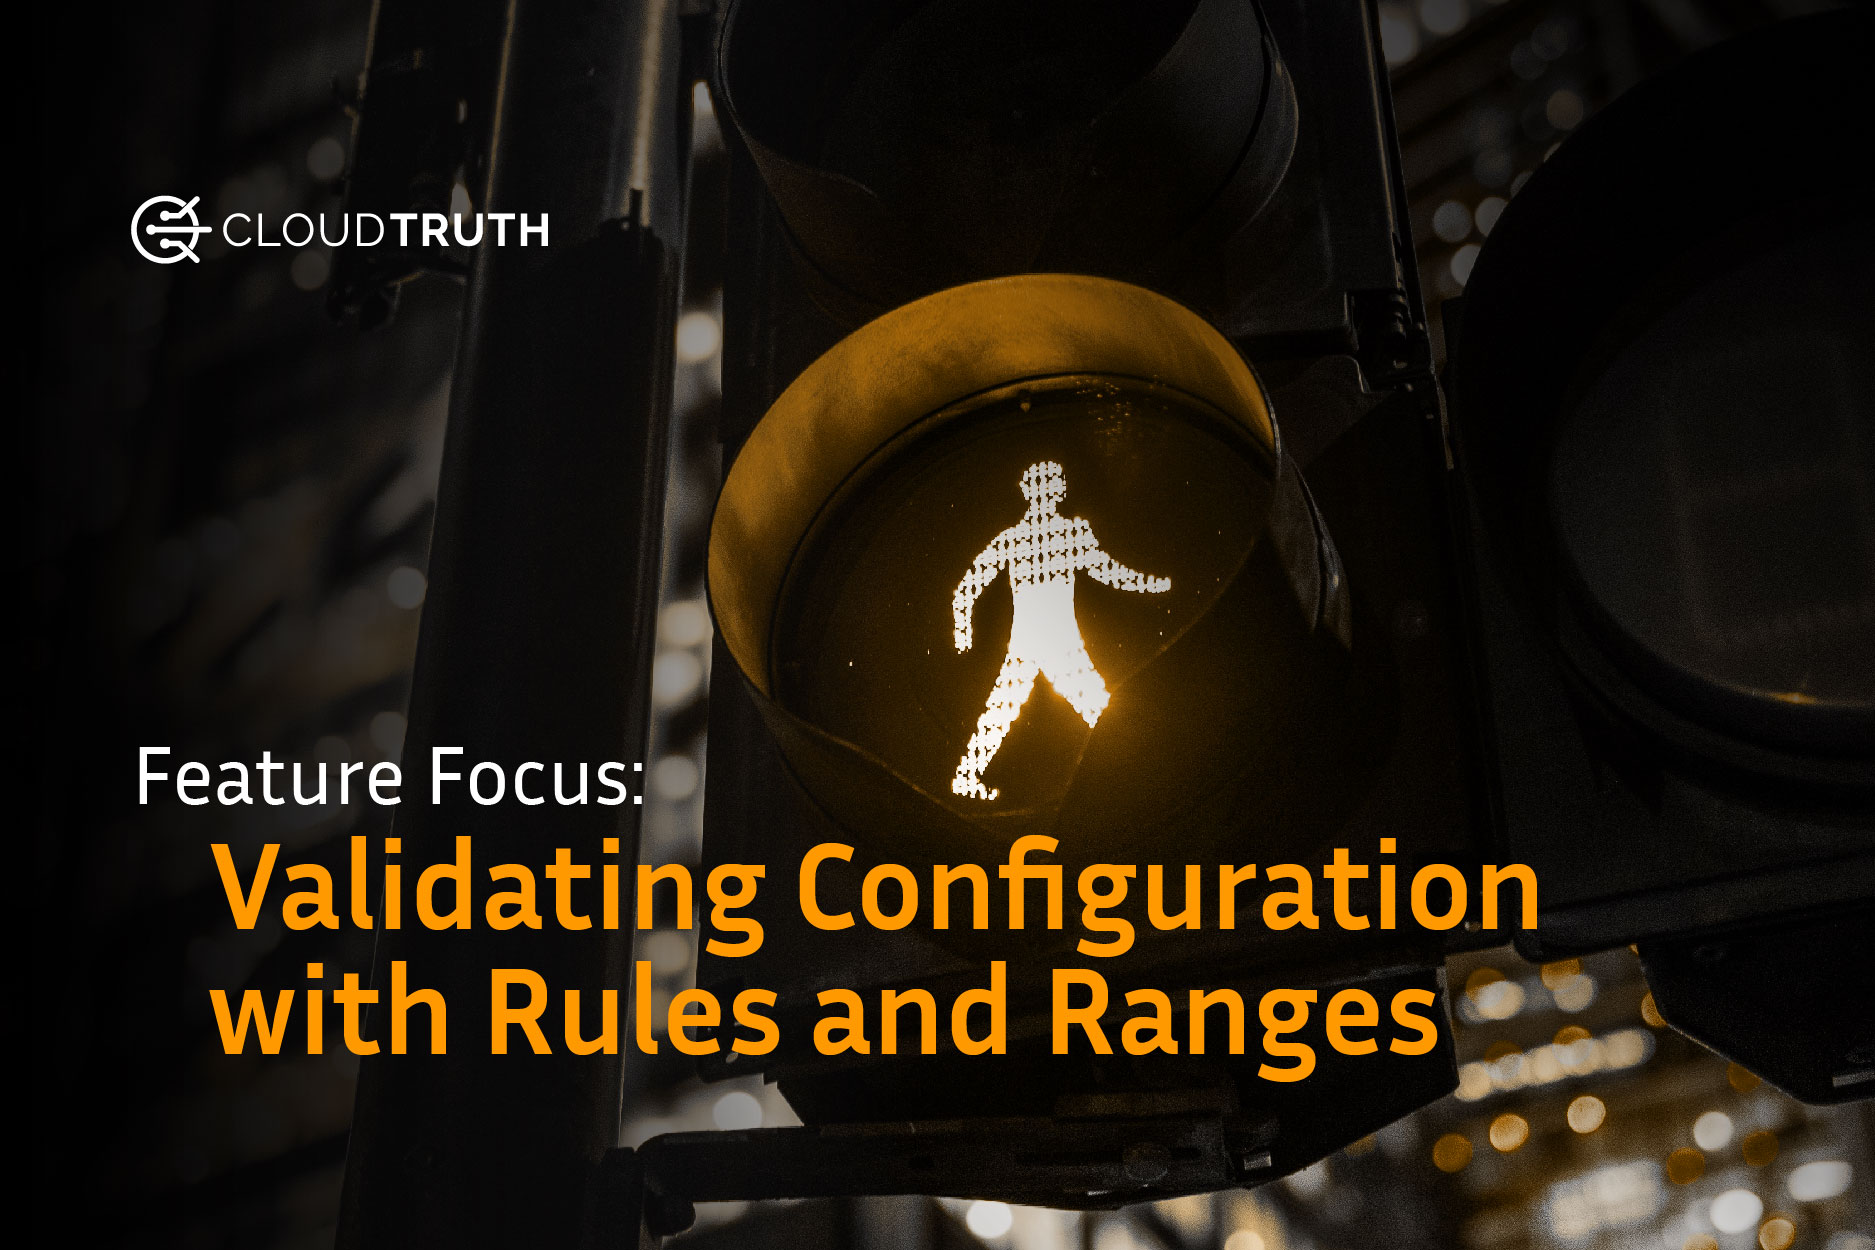 Feature Focus – Validating Configuration with Rules and Ranges